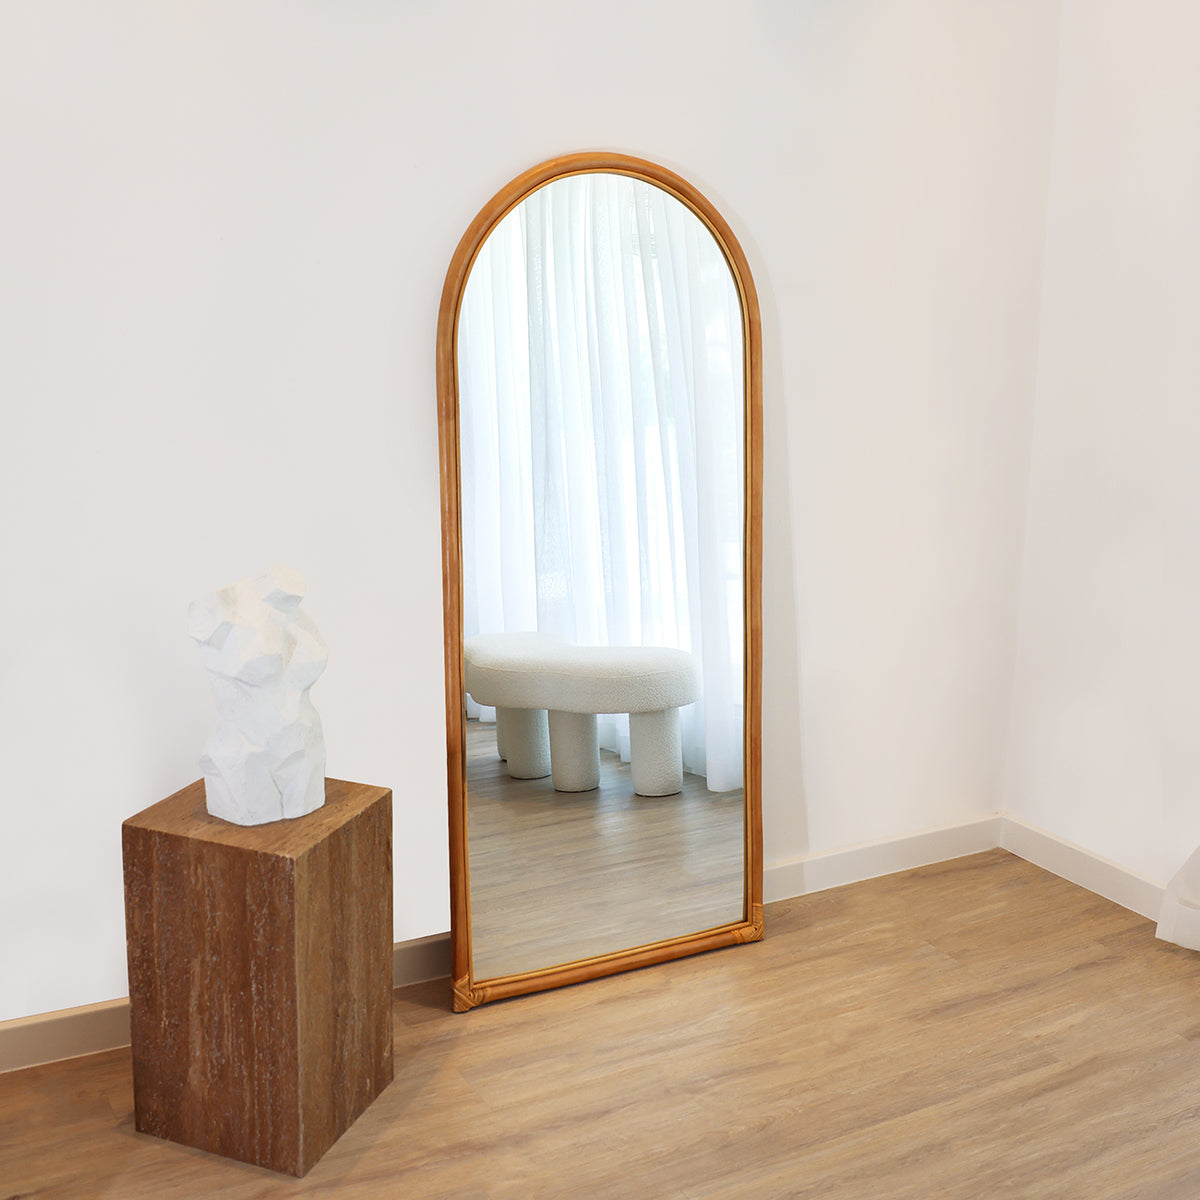 TOBA -  HAND MADE NATURAL BAMBOO FULL LENGTH ARCHED MIRROR 180CM X 90CM